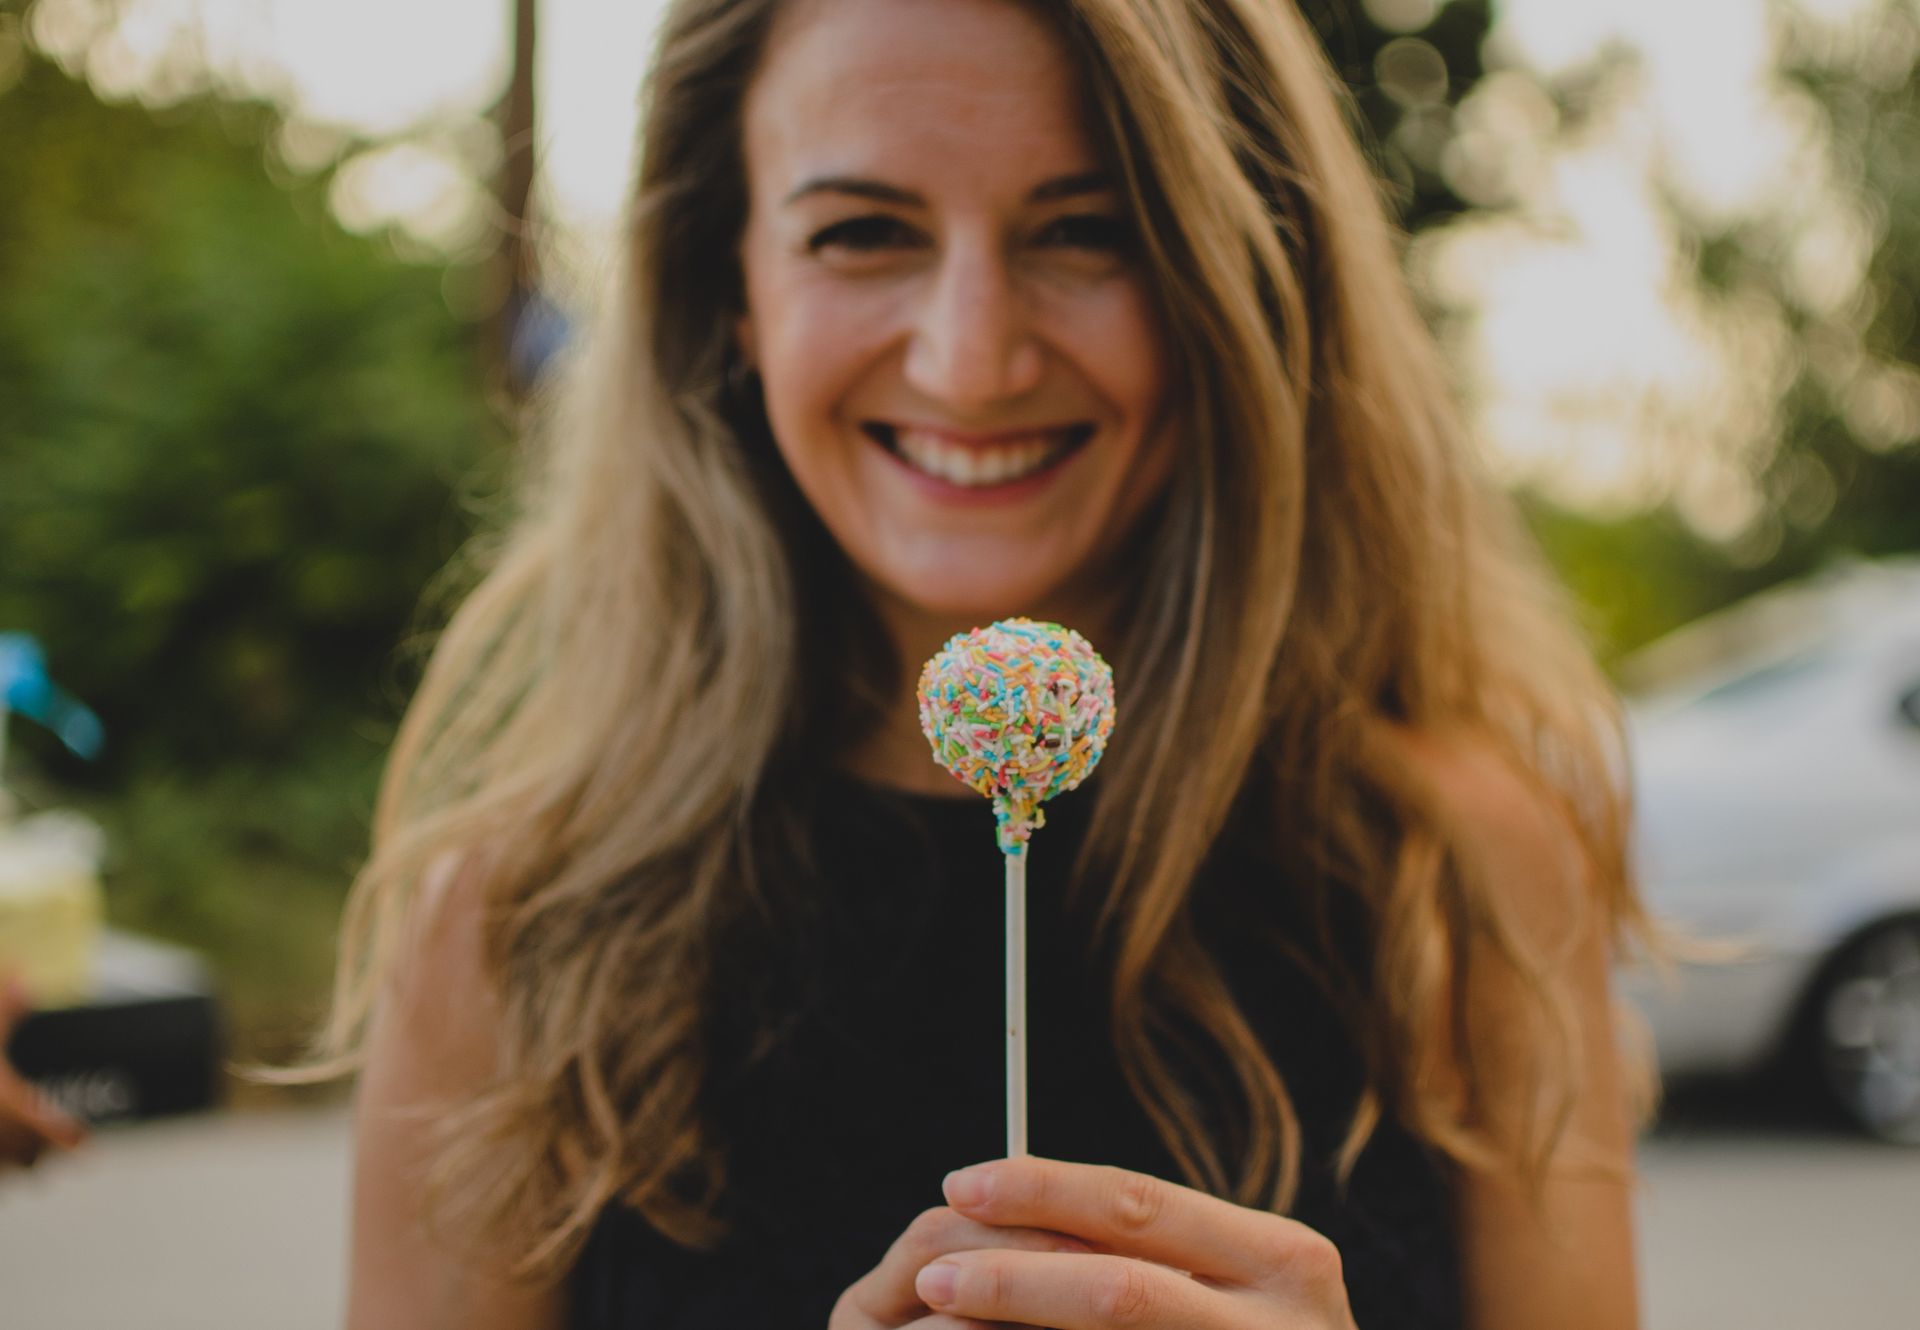 A girl holding a lollipop while showing a beautiful smile.